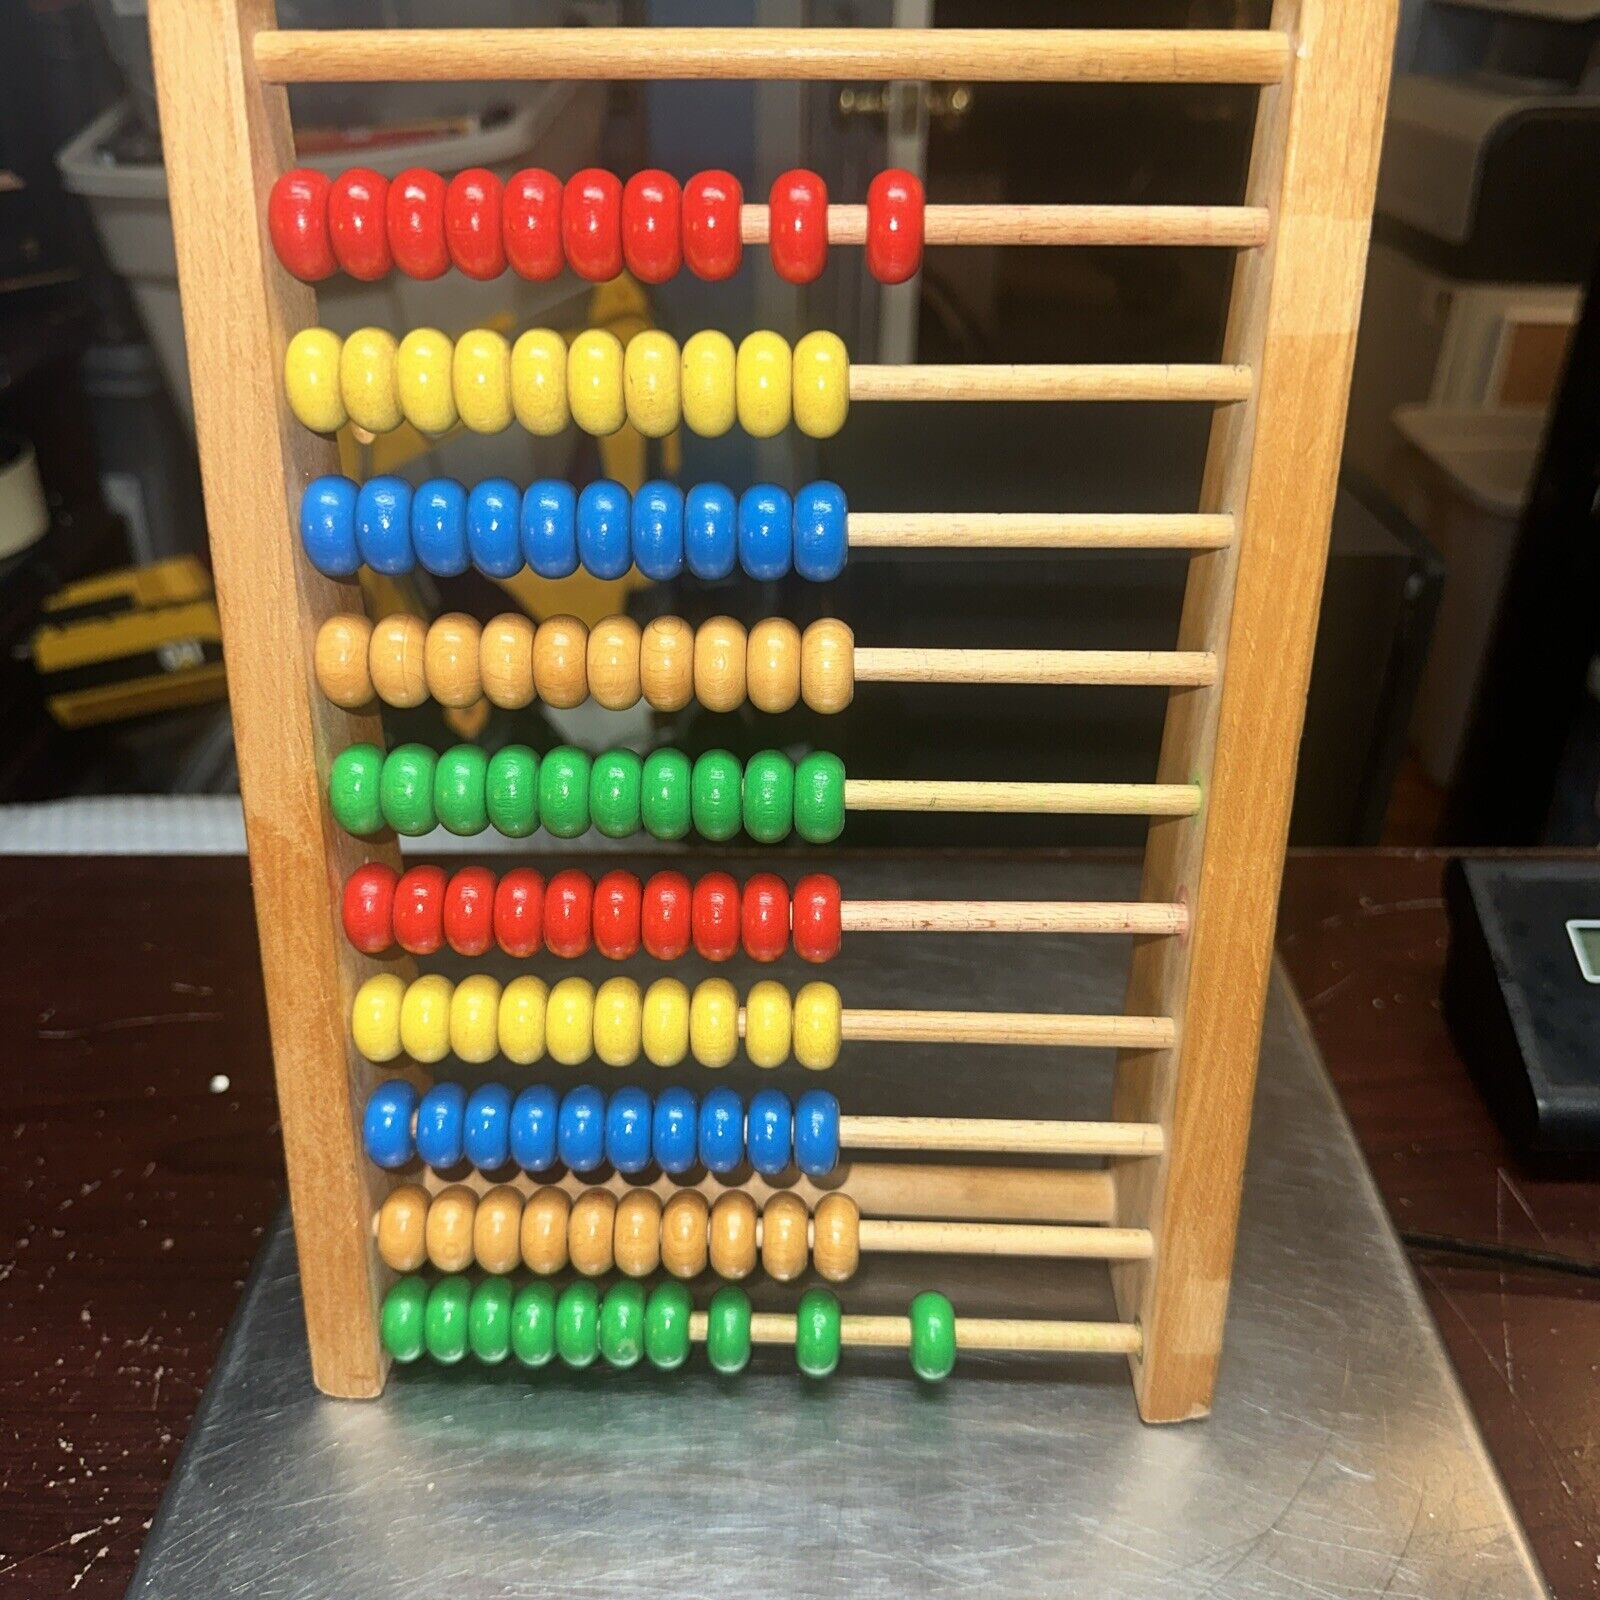 Imagination Generation 100-bead Wooden Abacus for Kids Learning Math Counting